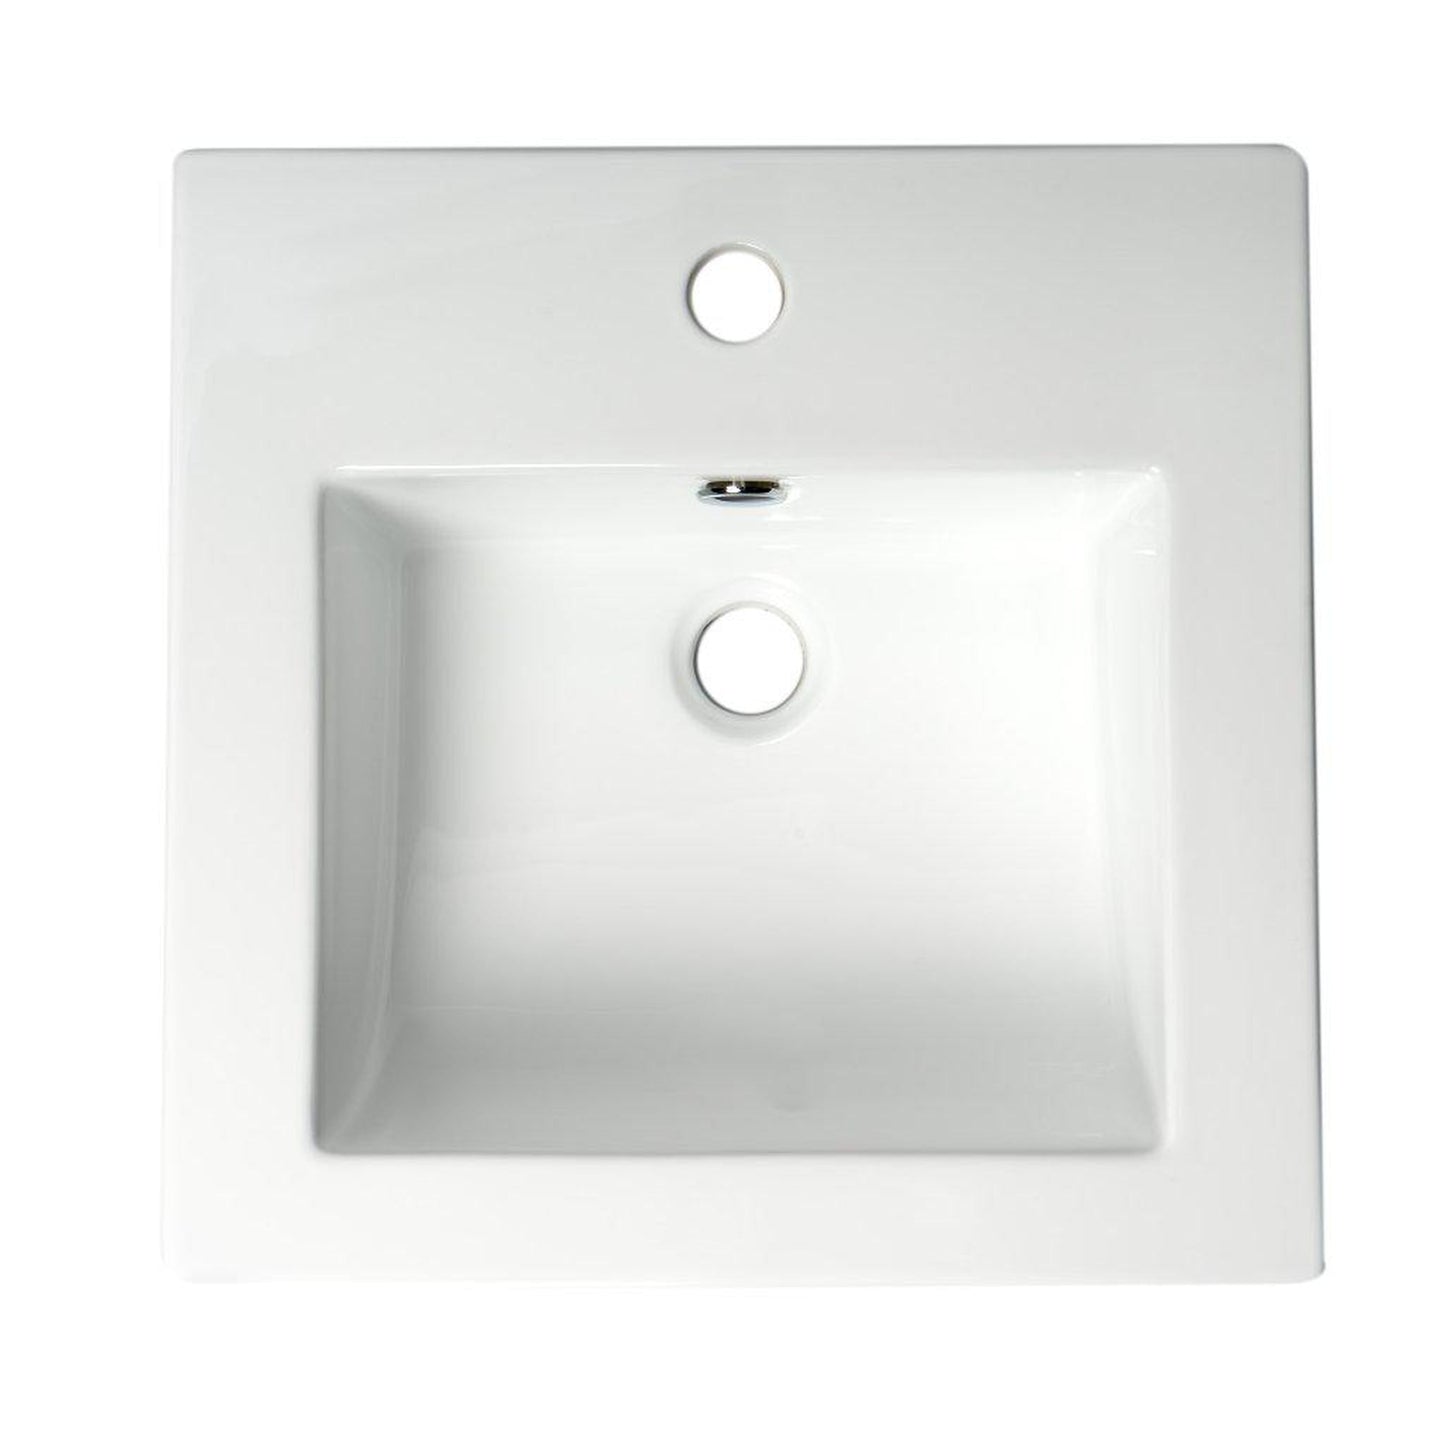 ALFI Brand ABC801 17" White Glossy Drop In Square Ceramic Bathroom Sink With Single Faucet Hole and Overflow